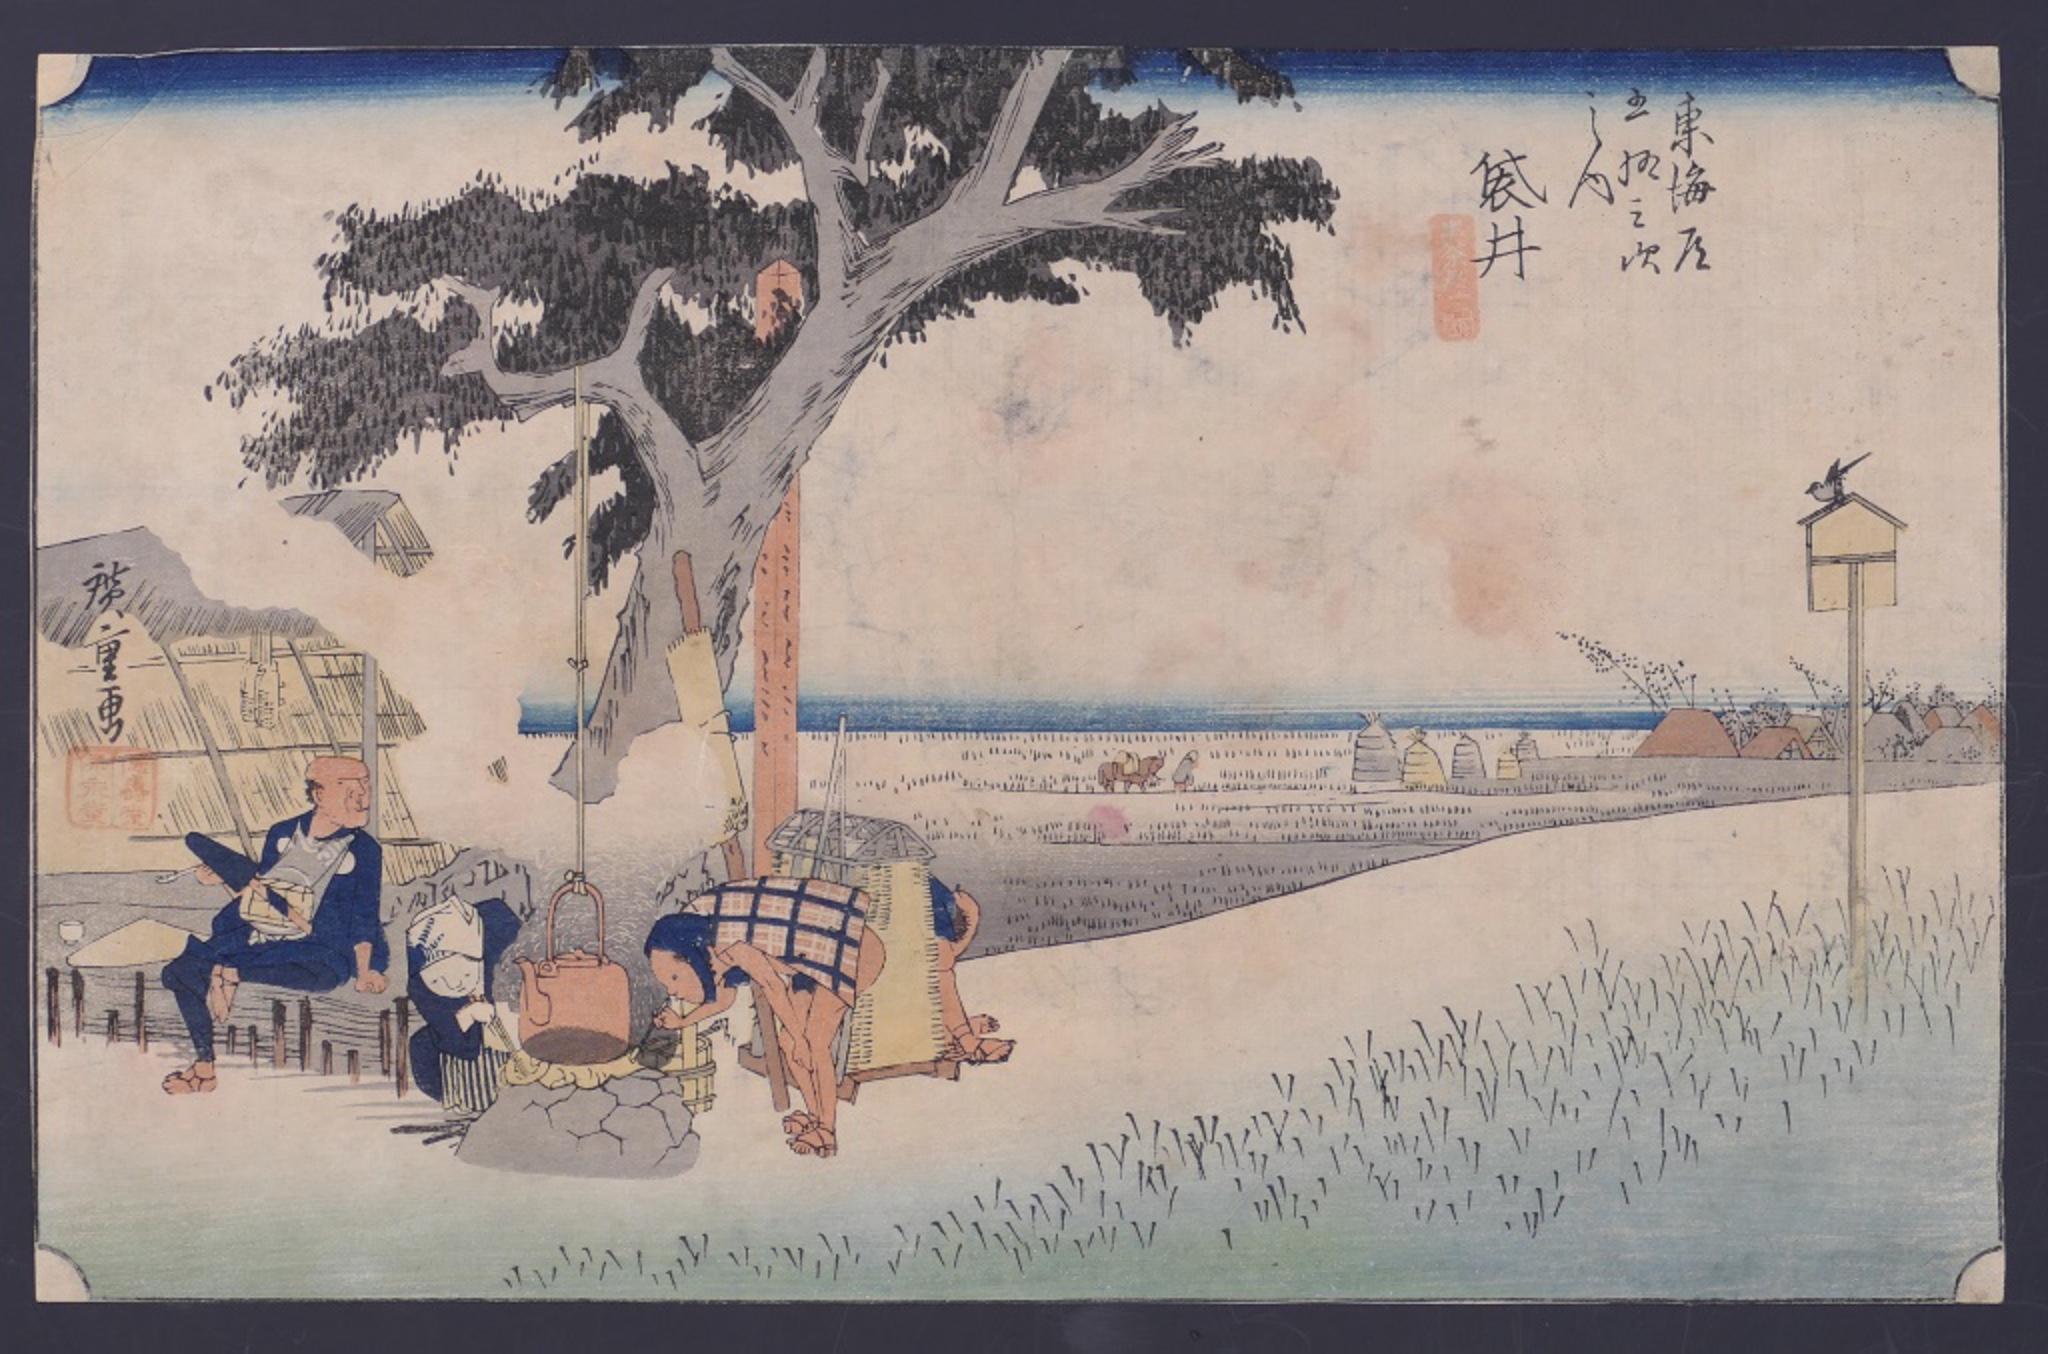 Fukuroi Dejaya No Zu (An Outdoor Tea Stall at Fukuroi), is a polychrome woodblock print on paper, the plate n. 28 from the series  Fifty-three Stations Along  the Tokaido (Tokaido Gosantsugi no uchi).

This plate, as well all the plates of the whole